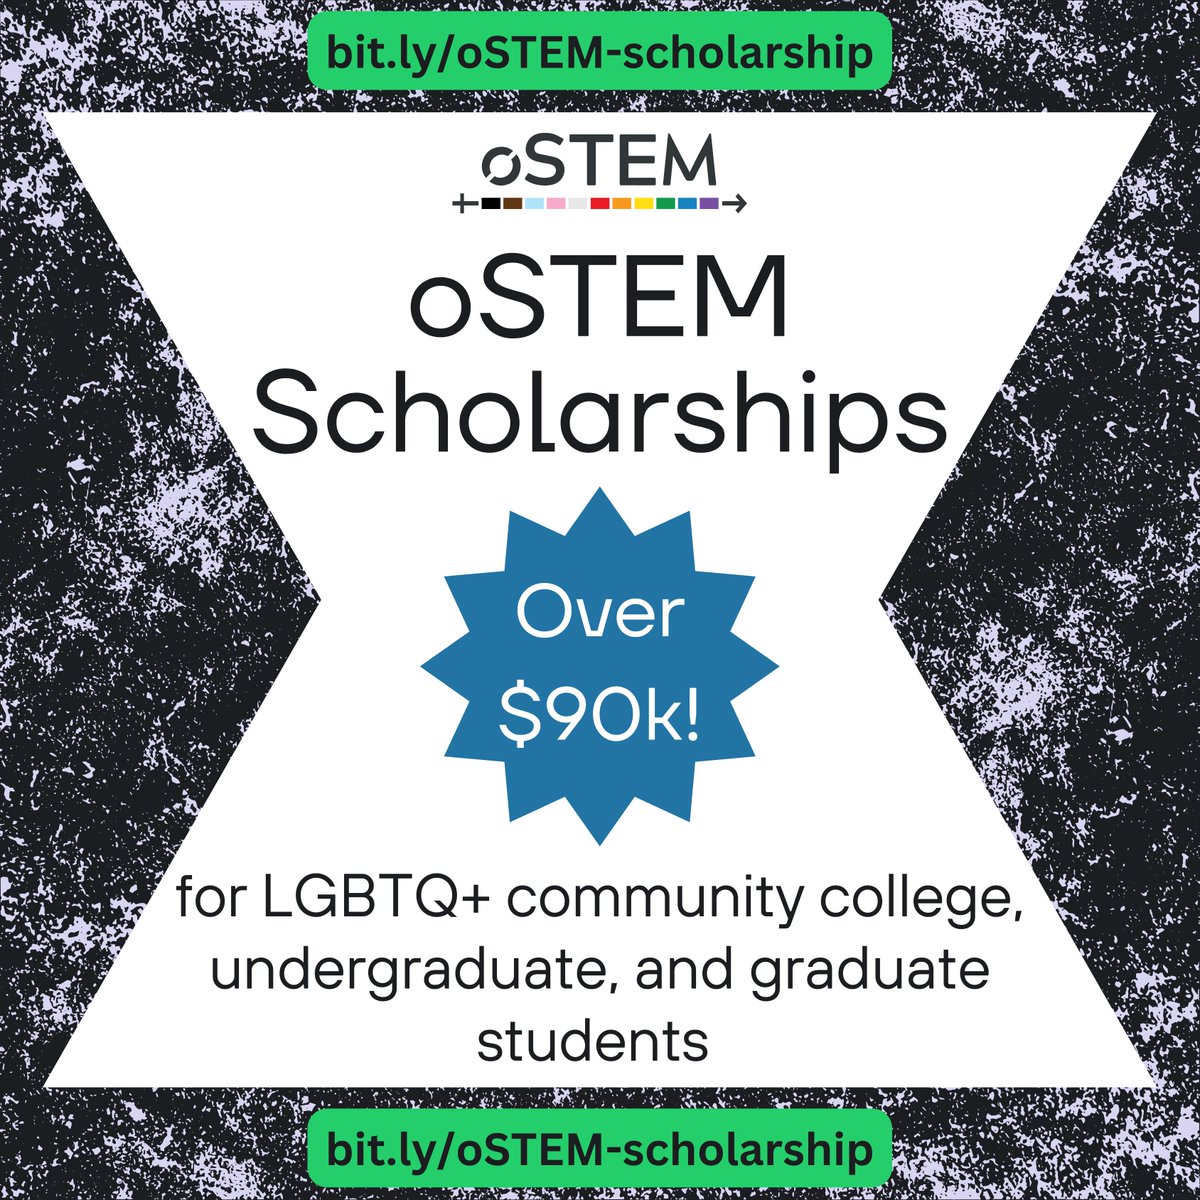 Now Open: oSTEM Scholarship Applications! There are over $90,000 in scholarships available for LGBTQ+ community college, undergraduate, and graduate students - you can learn more and apply at bit.ly/oSTEM-scholars… Applications close at 11:59 pm Eastern Time on Sunday, June 16th